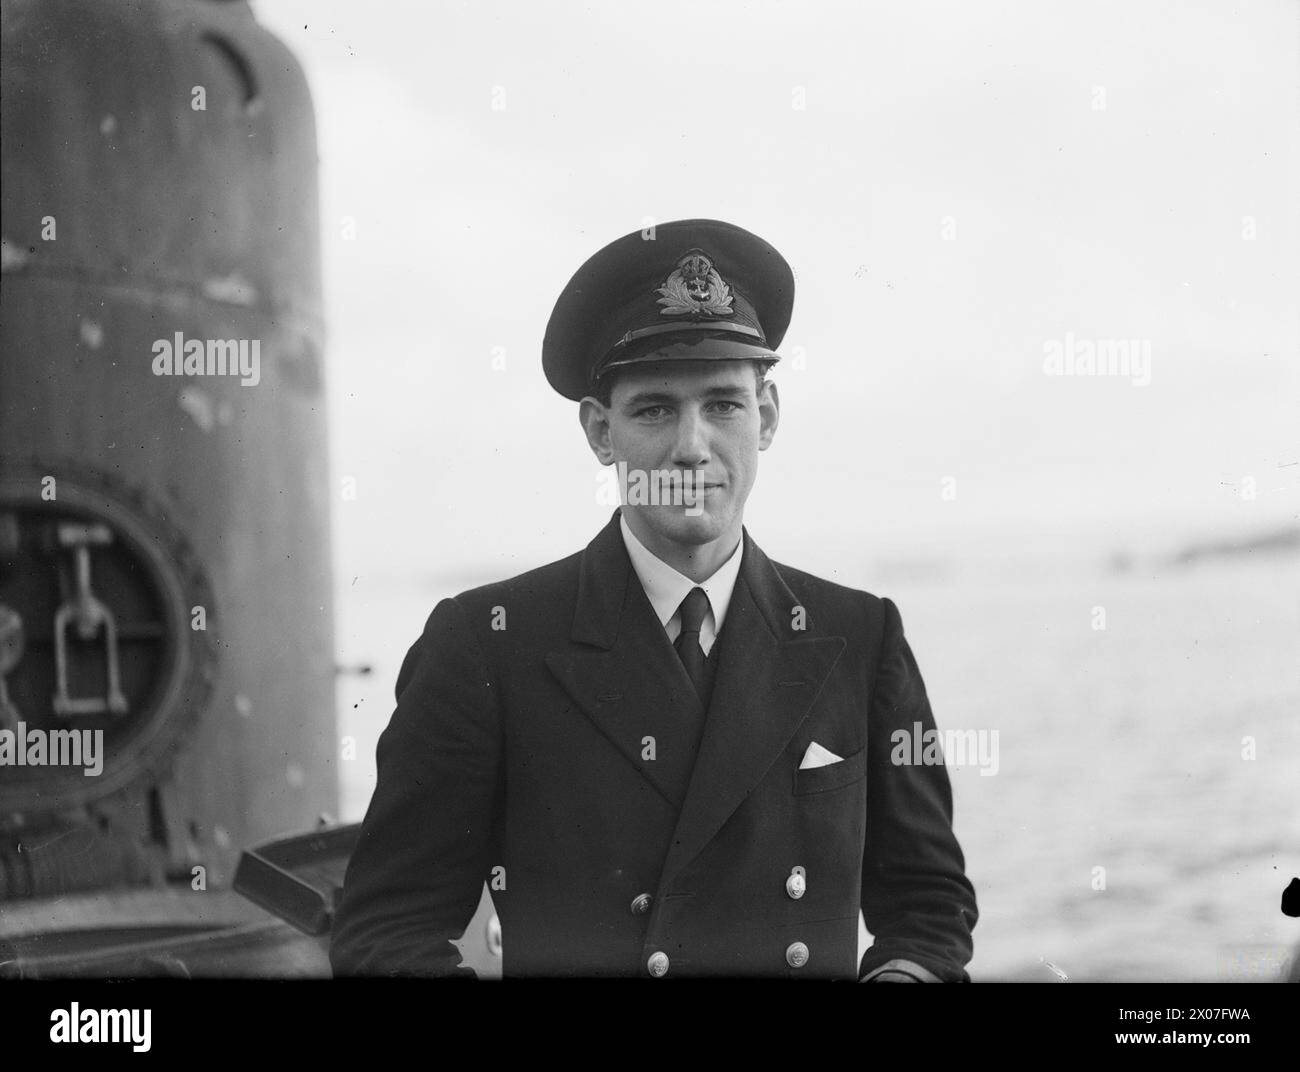 LT N L A JEWELL, RN - CAPTAIN OF THE 'SECRET MISSION' SUBMARINE. 25 JANUARY 1943, HOLY LOCH. LT N L A JEWELL, RN, CAPTAIN OF HMS/M 219 HAS MADE SOME SPECTACULAR CONTRIBUTIONS TO THE SUCCESS OF THE ALLIED NORTH AFRICAN OFFENSIVE. ON HIS FIRST OPERATIONAL COMMAND HE WAS ENTRUSTED WITH THREE HIGHLY IMPORTANT SECRET MISSIONS: (1) MAKING IMPORTANT RECONNAISSANCE OFF THE ALGERIAN COAST TO PREPARE FOR THE OFFENSIVE OPENING; (2) LANDING AND RE-EMBARKING THE SECRET MISSION OF US ARMY OFFICERS WHO MADE CONTACT WITH PRE-ALLIED FRENCH LEADERS AND CLEARED THE WAY FOR THE ALLIED OPERATIONS; (3) EMBARKING GE Stock Photo